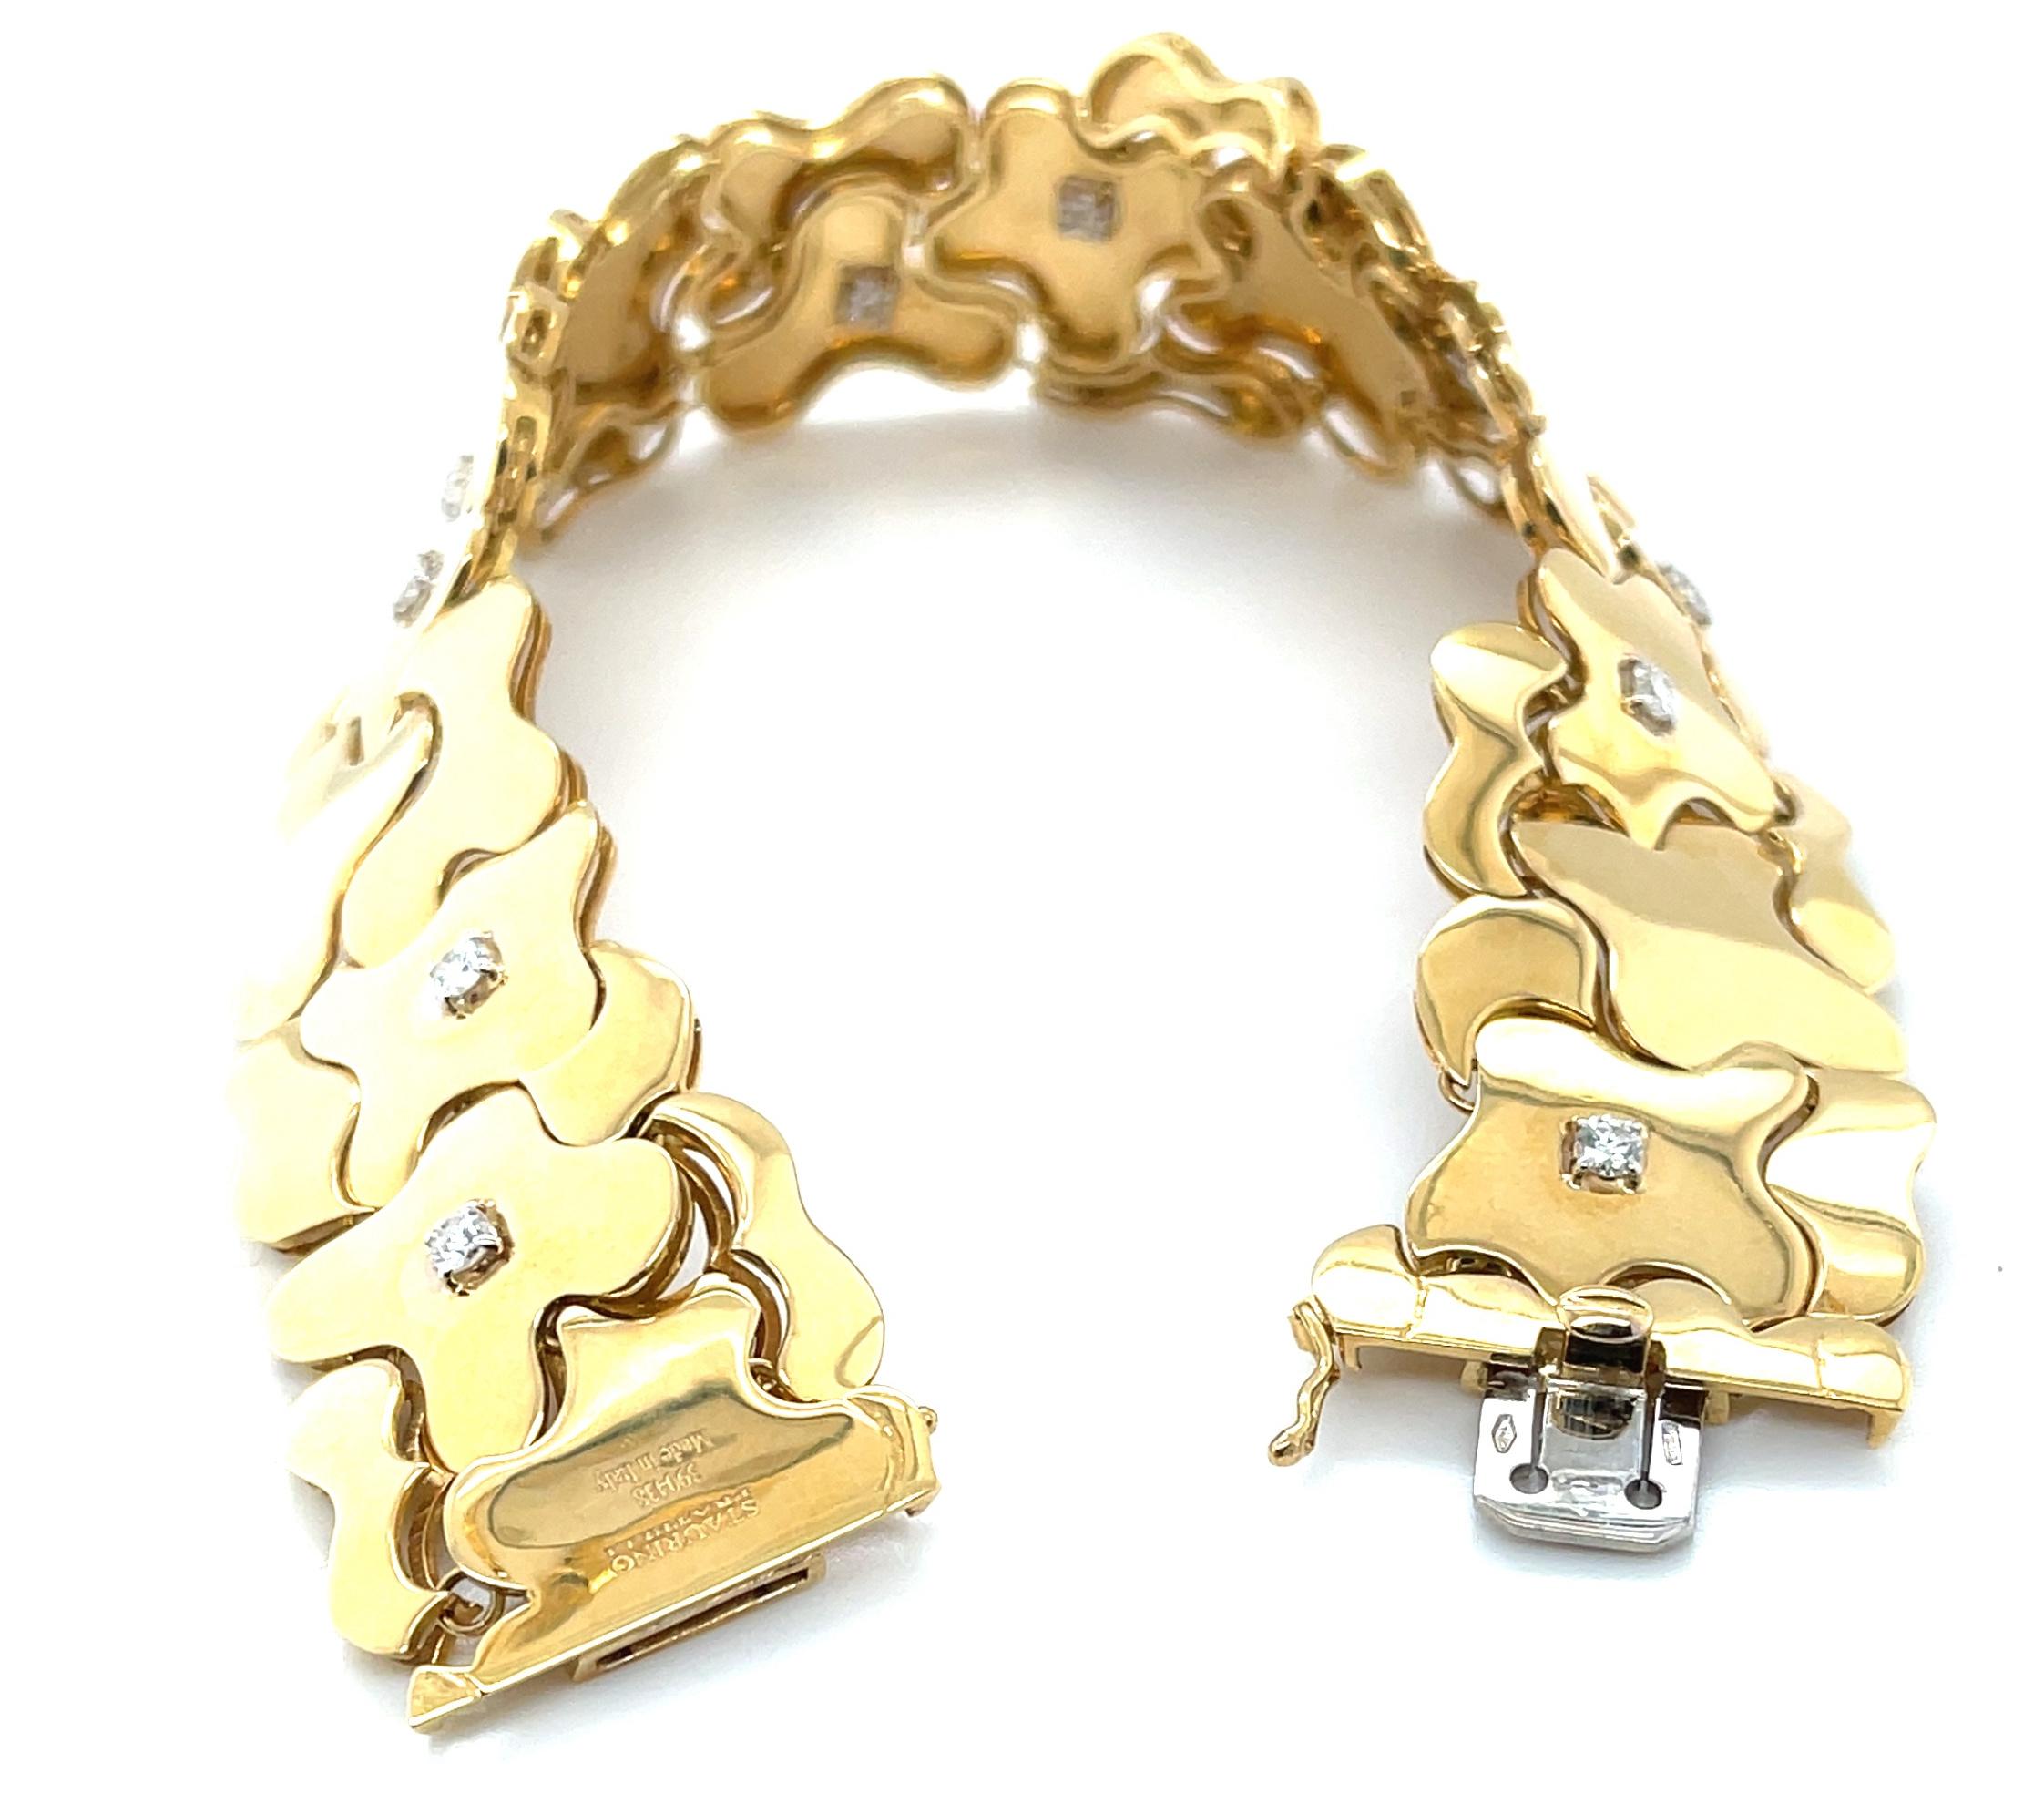 
This stunning bracelet was handcrafted in Italy by Staurino Fratelli. It is high-fashion and elegant and fun to wear! With an ingenious “puzzle” design, the 18k yellow gold links are expertly connected to fit together with just enough space between